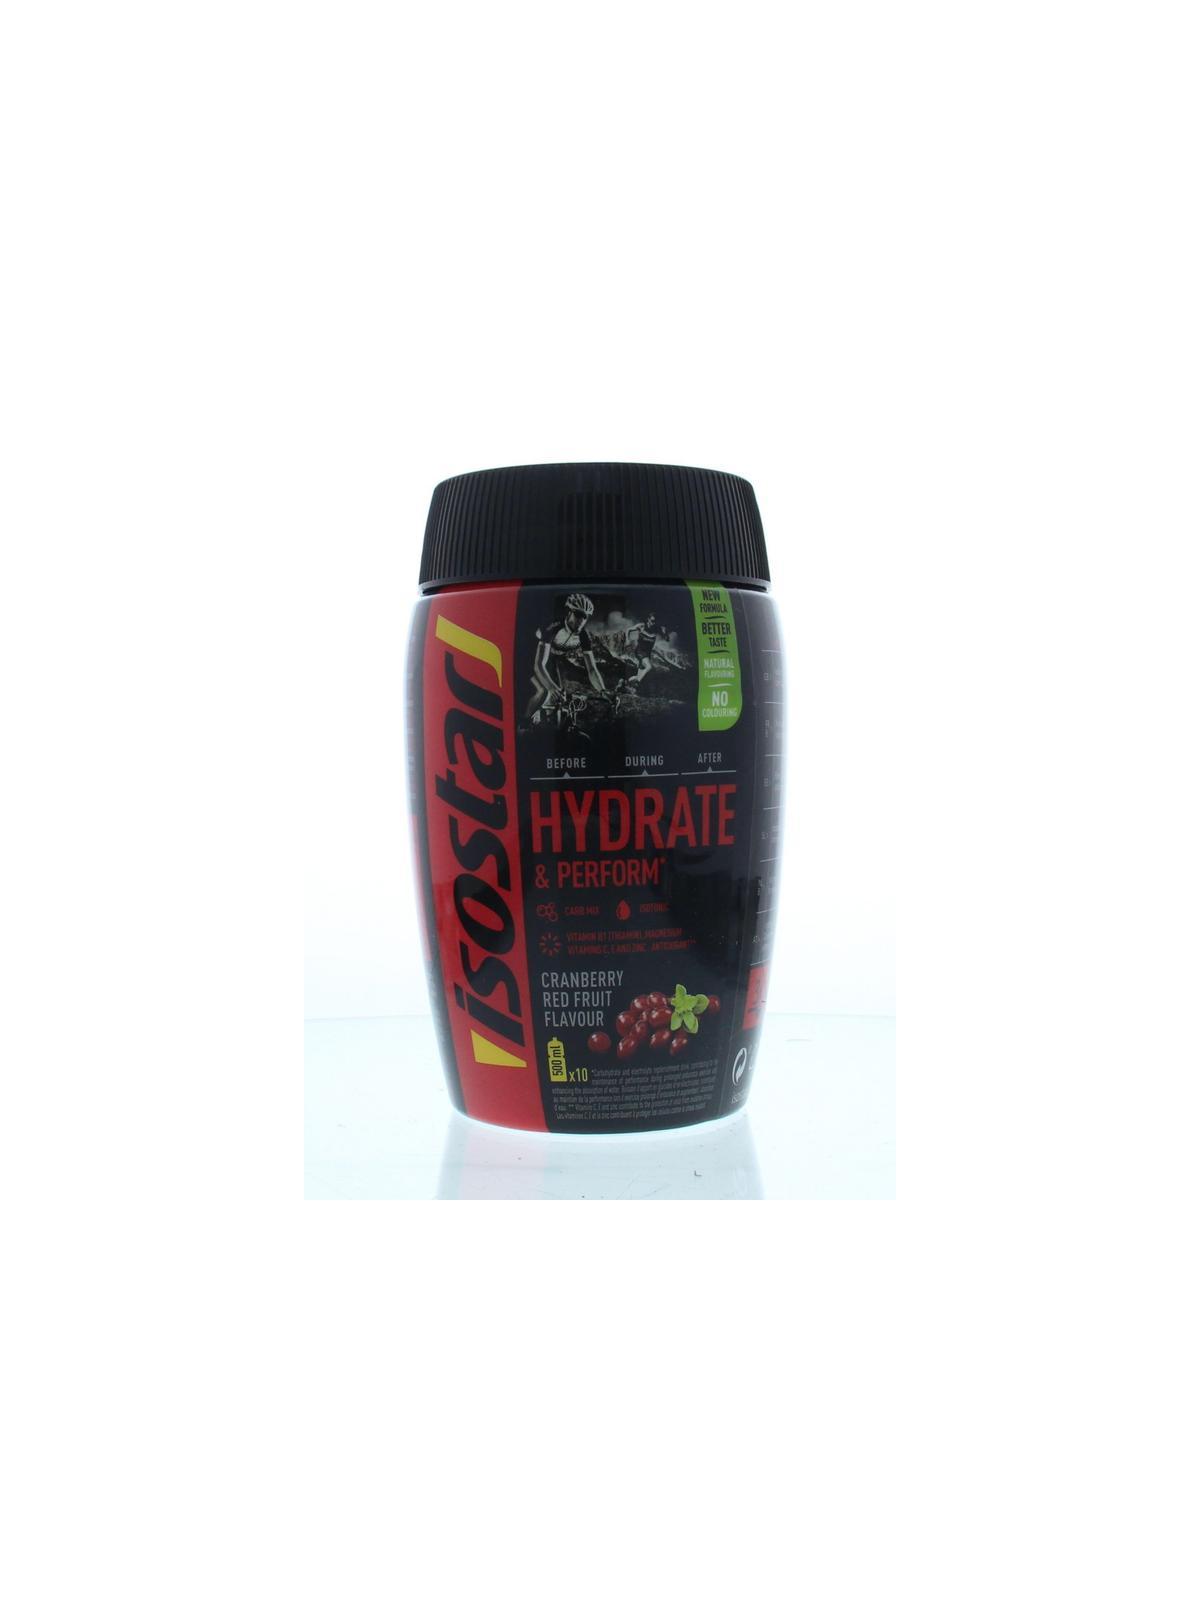 Hydrate & perform cranberry red fruit